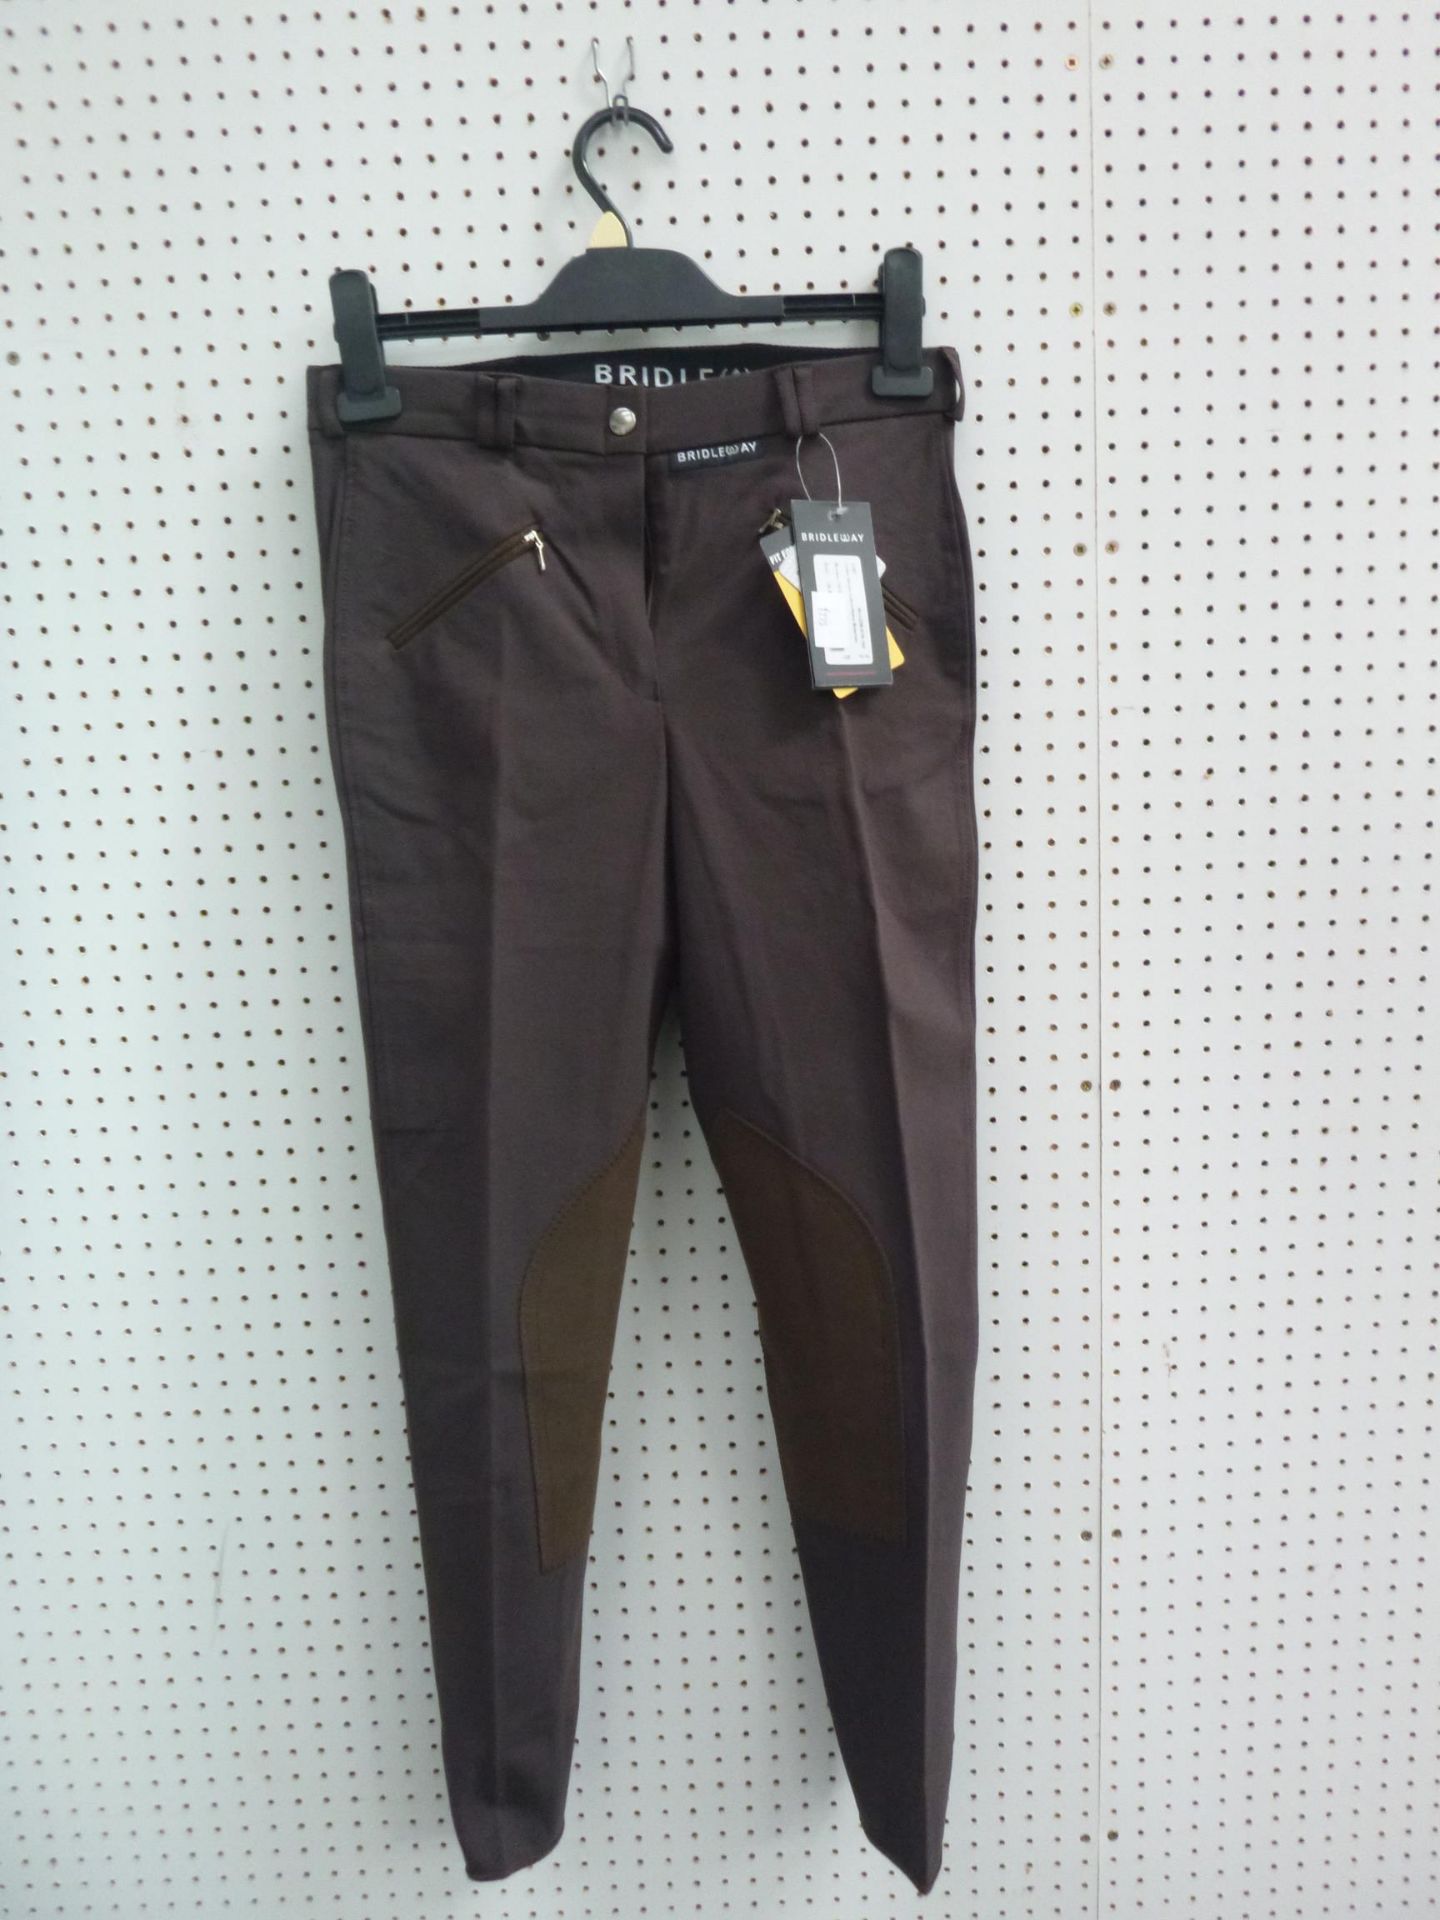 * Two Pairs of New Bridleway Ladies Woven Cotton/Nylon Breeches in Brown one size 26R the other